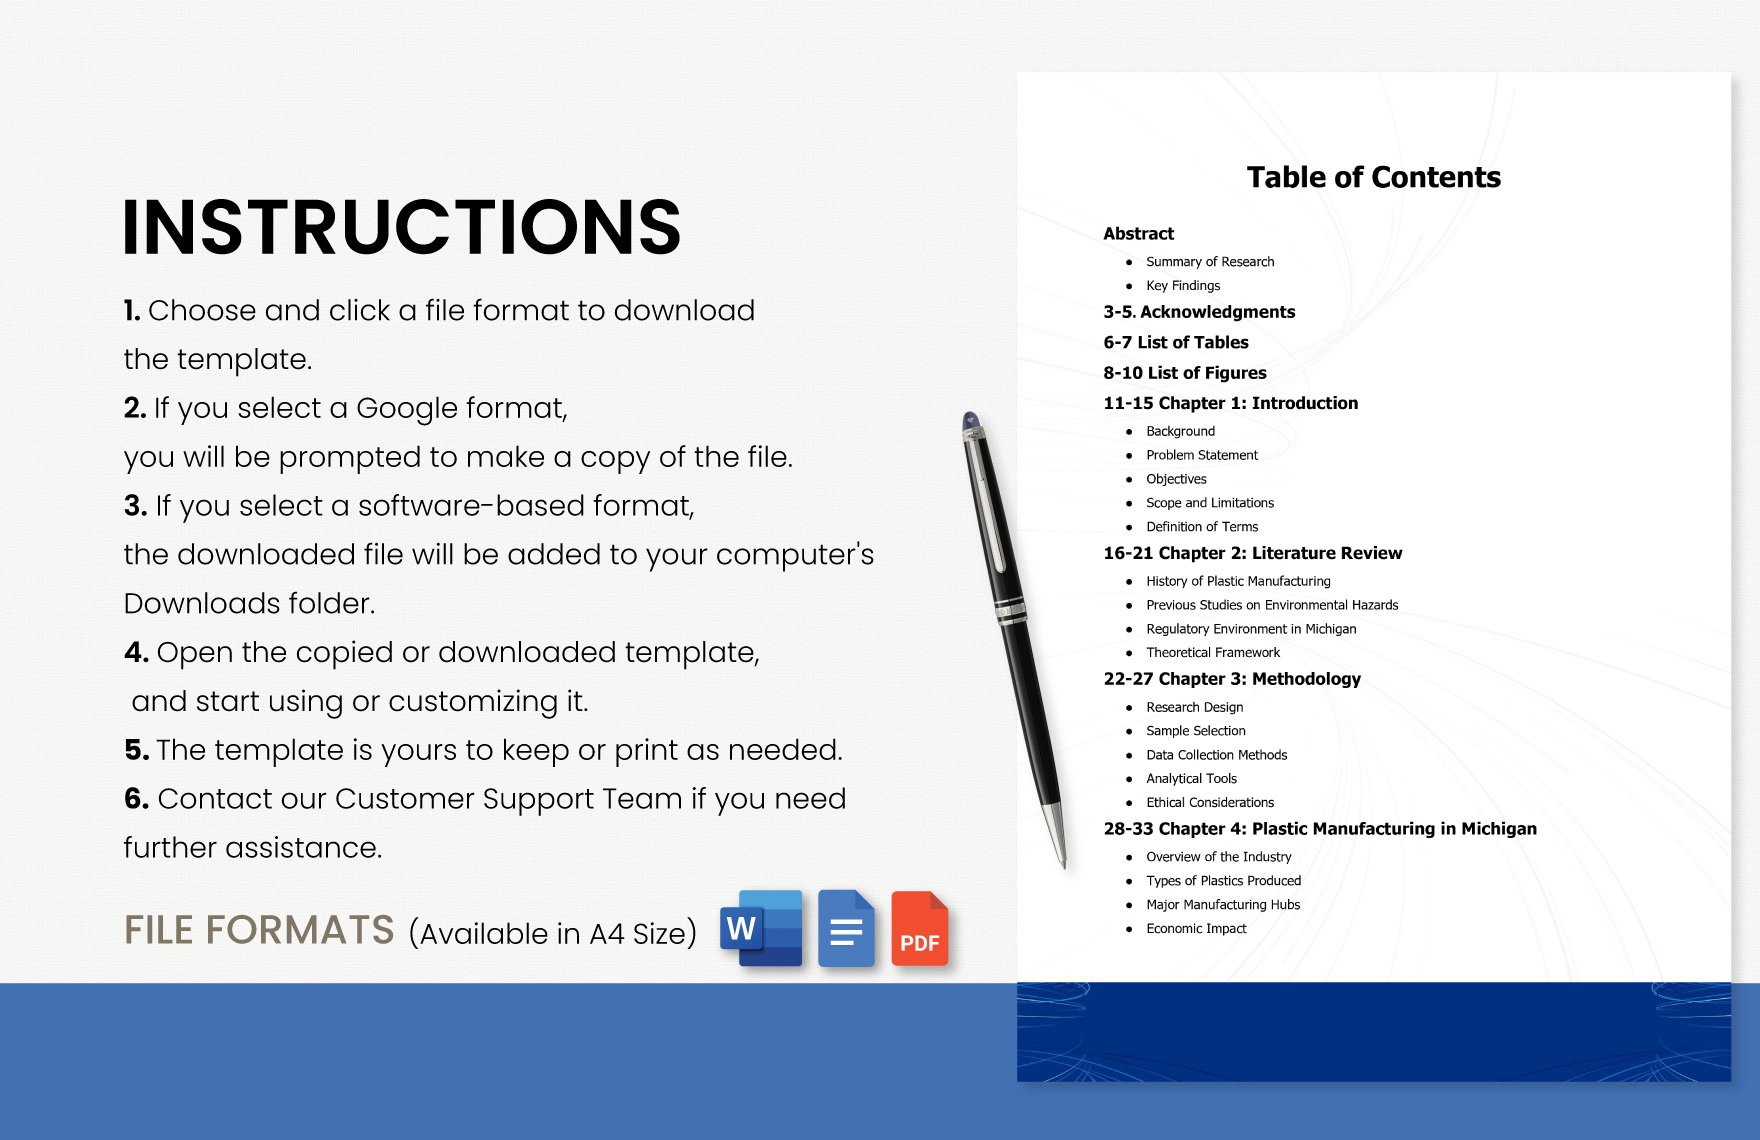 Project Table of Contents Template